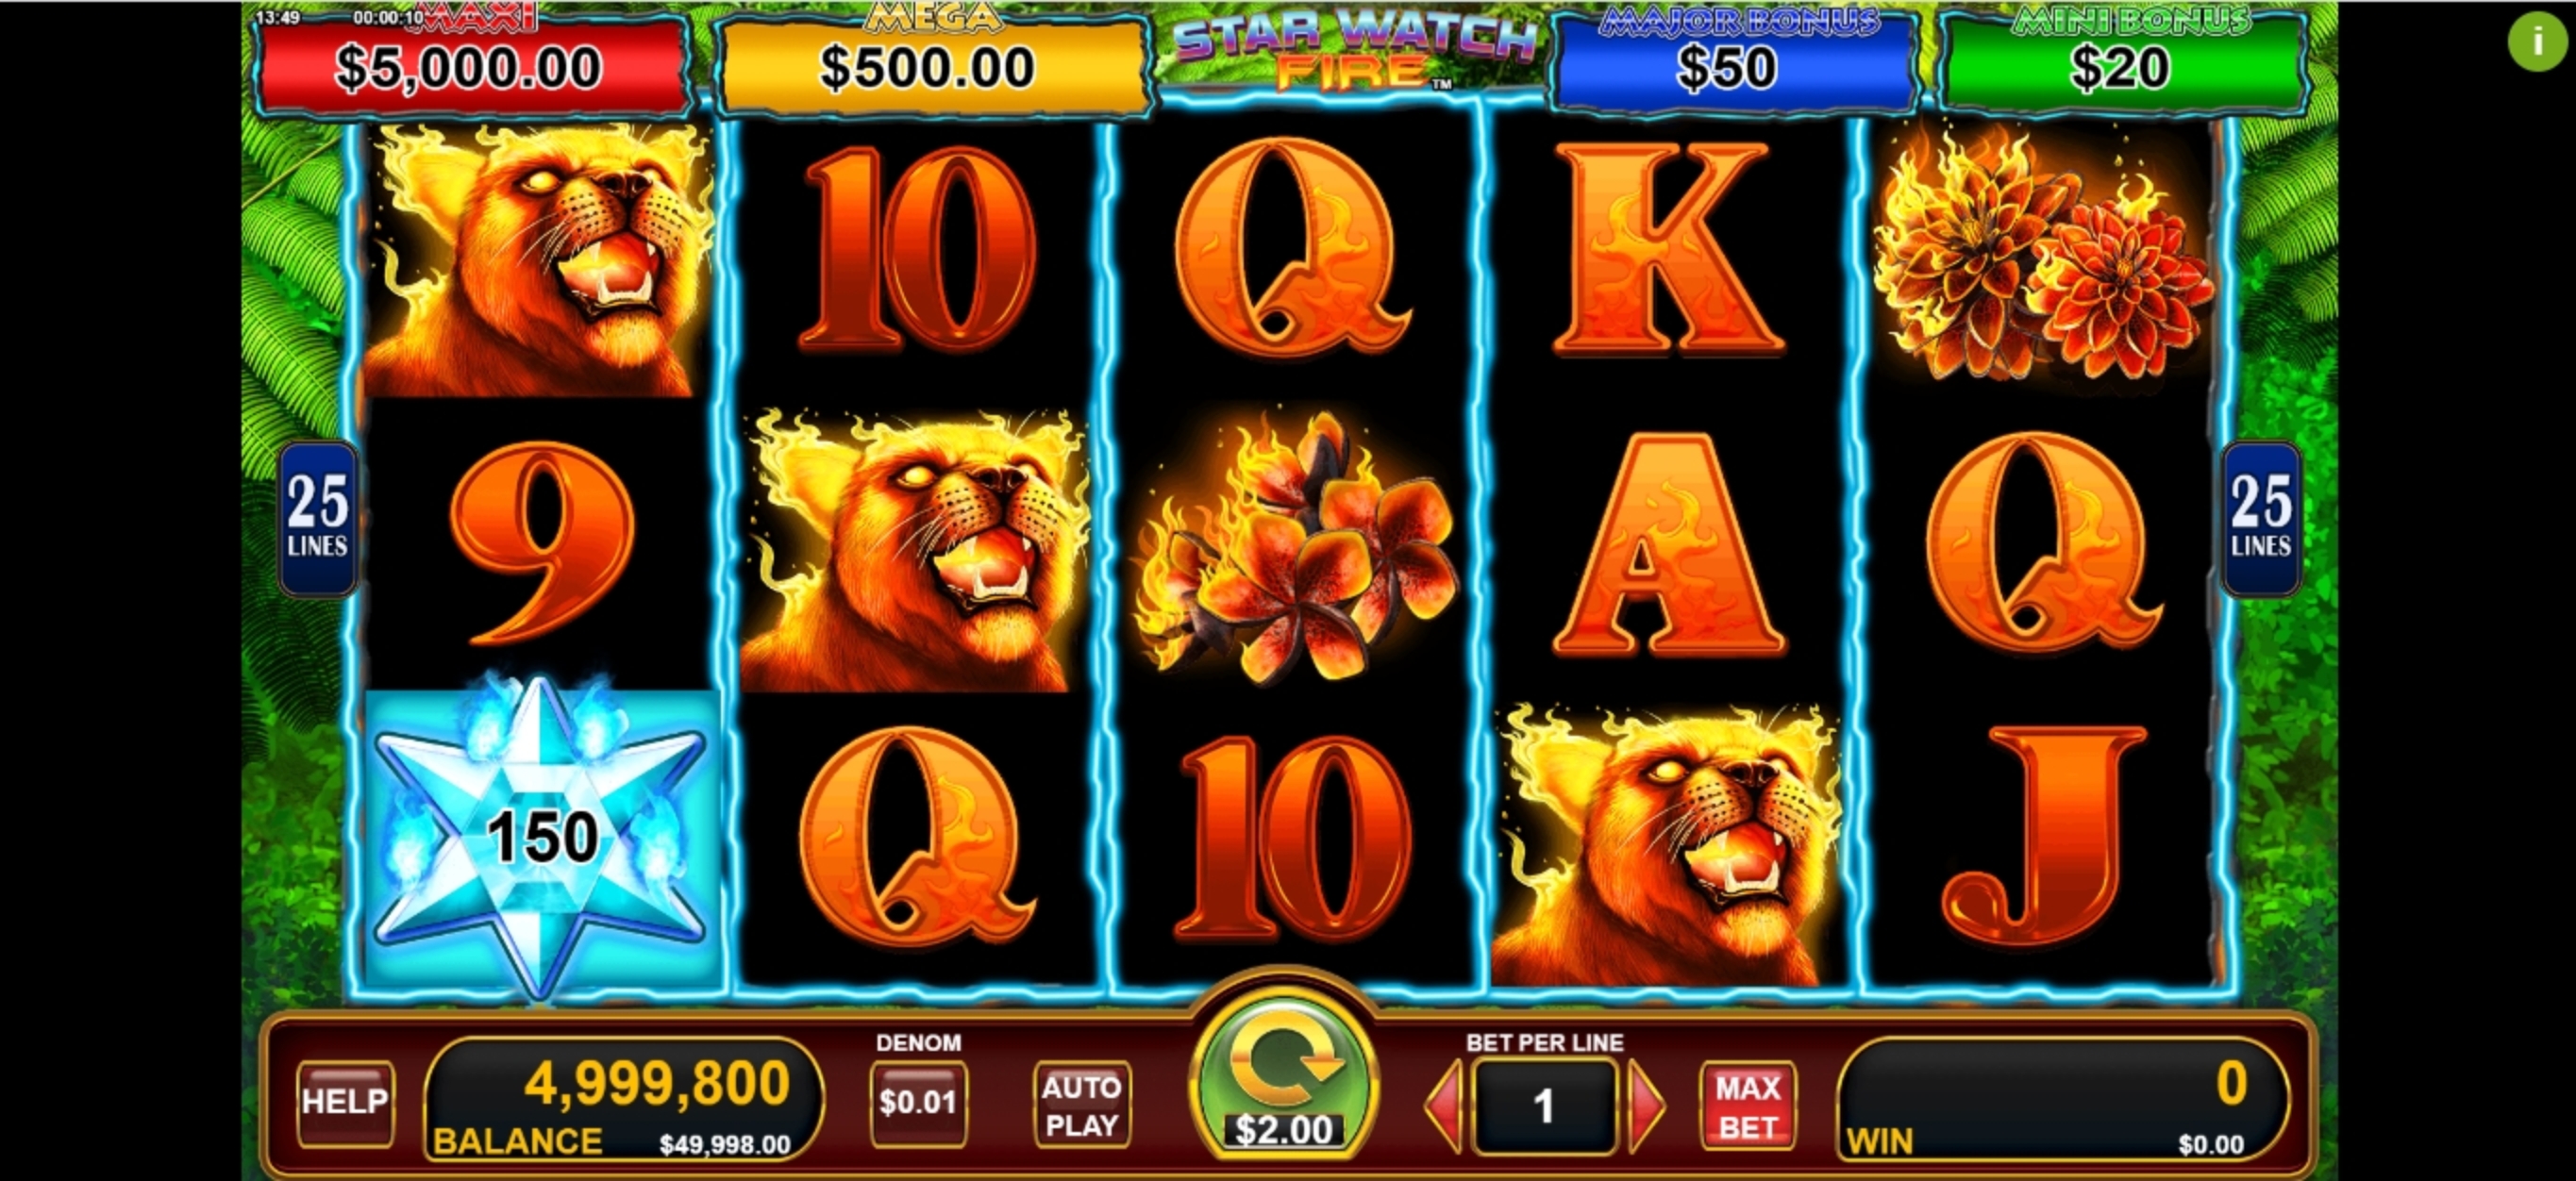 Win Money in Star Watch Fire Free Slot Game by Konami Gaming